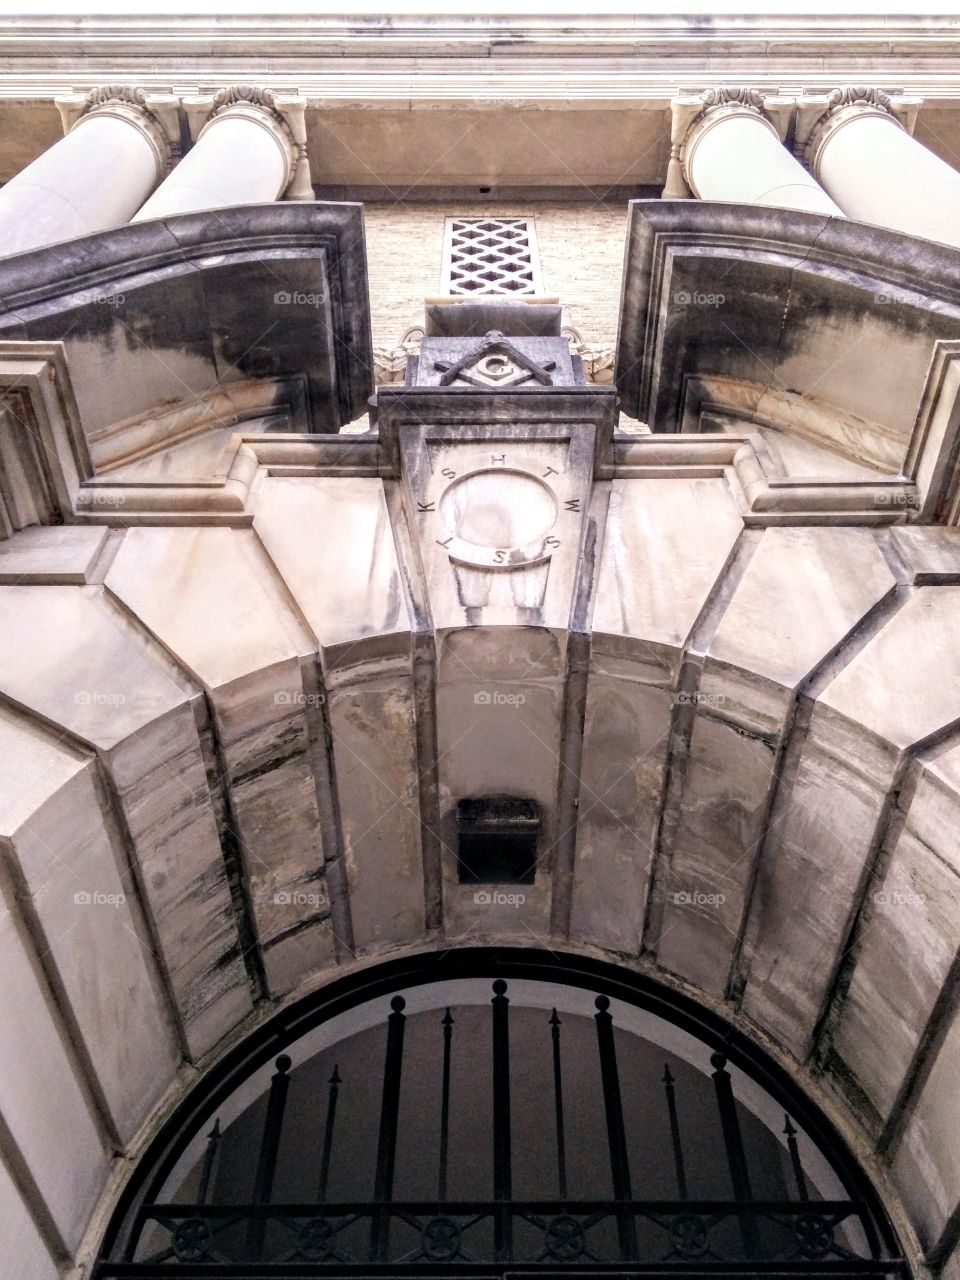 Stone Archway over a Masonic Temple